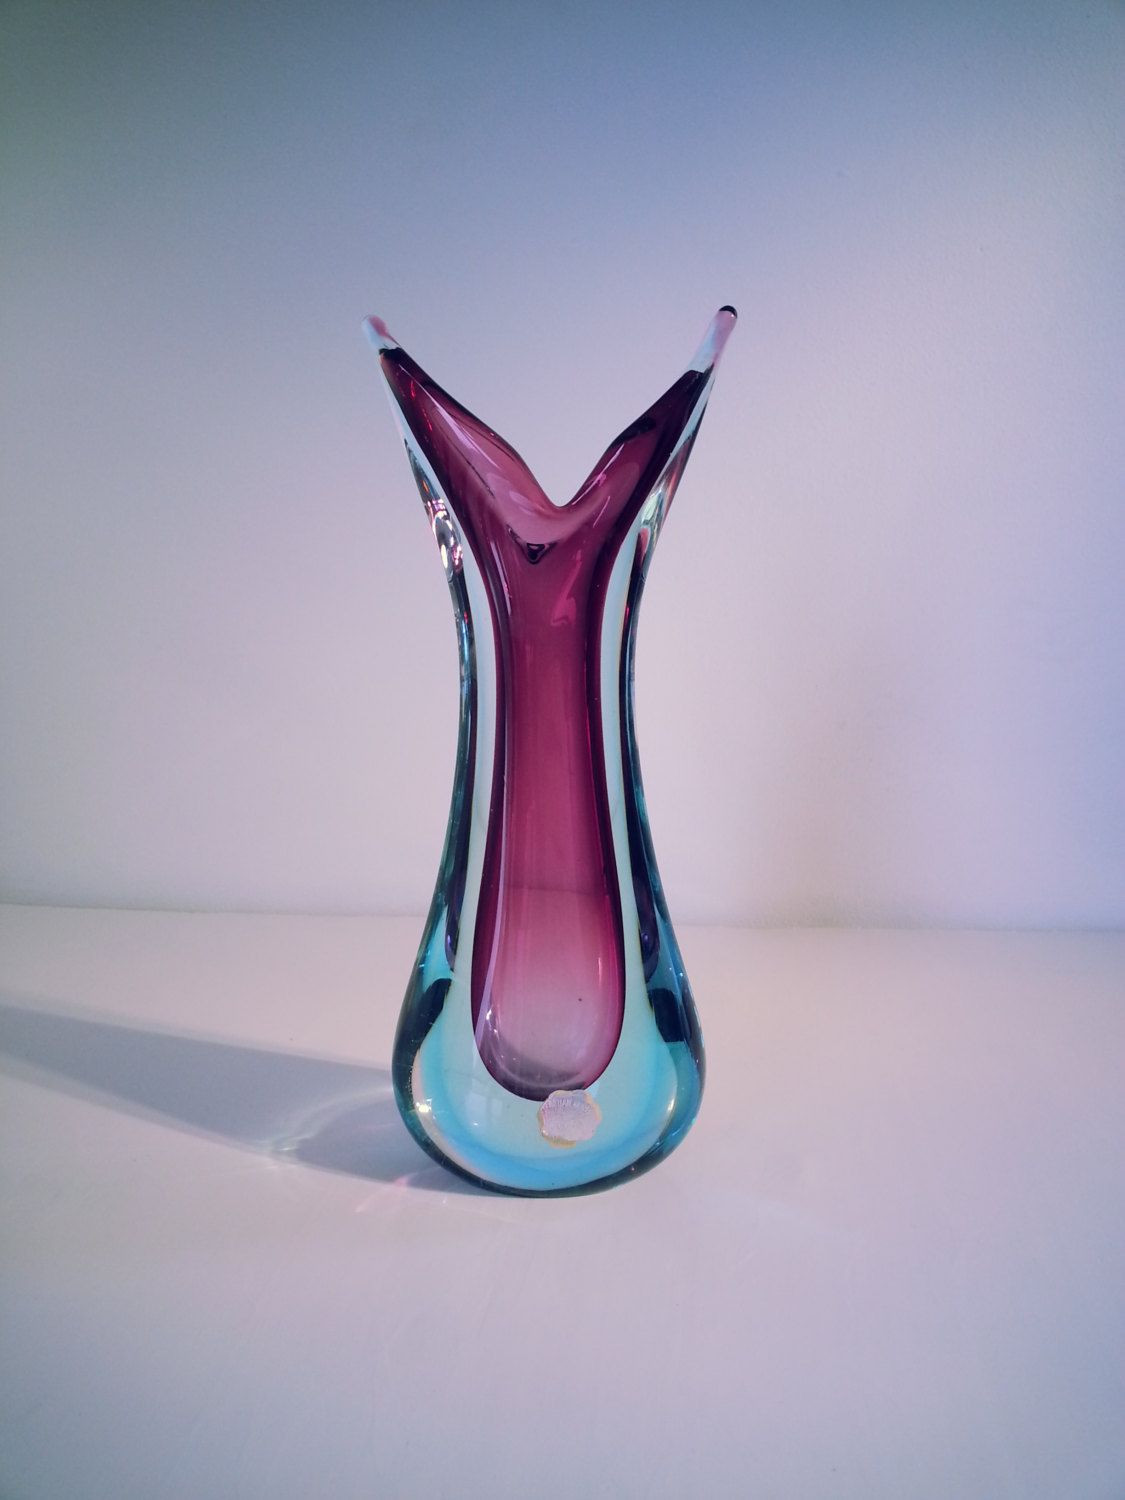 23 attractive Glass Bubble Wall Vase 2024 free download glass bubble wall vase of murano sommerso genuine venetian glass 1950s 1960s purple blue within murano sommerso genuine venetian glass 1950s 1960s purple blue glass vase pulled design vase m